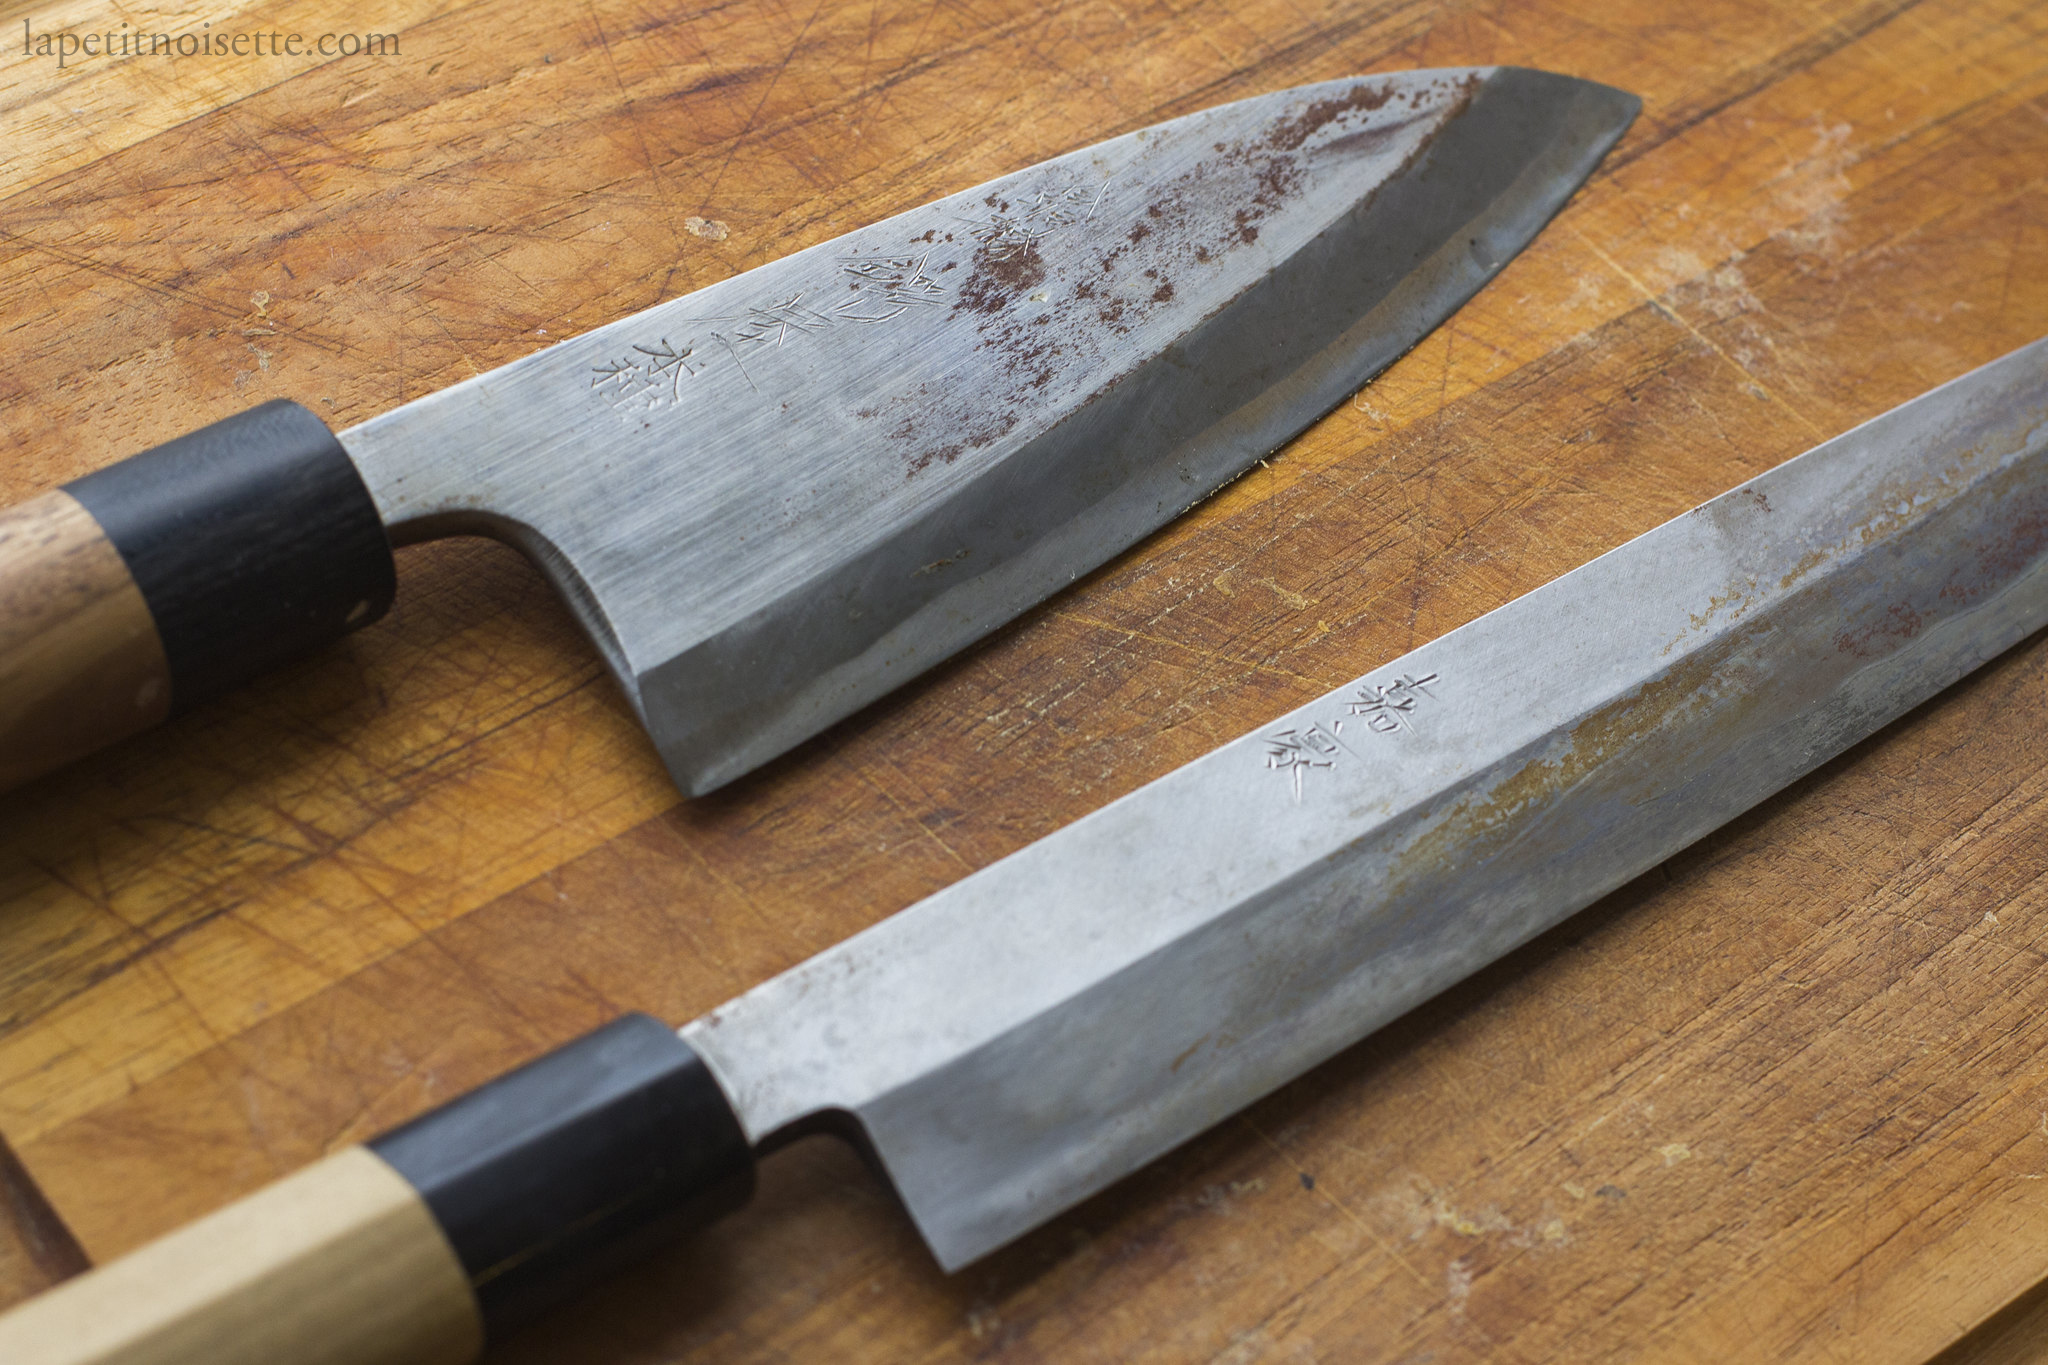 Cabon steel knives with rust build up.